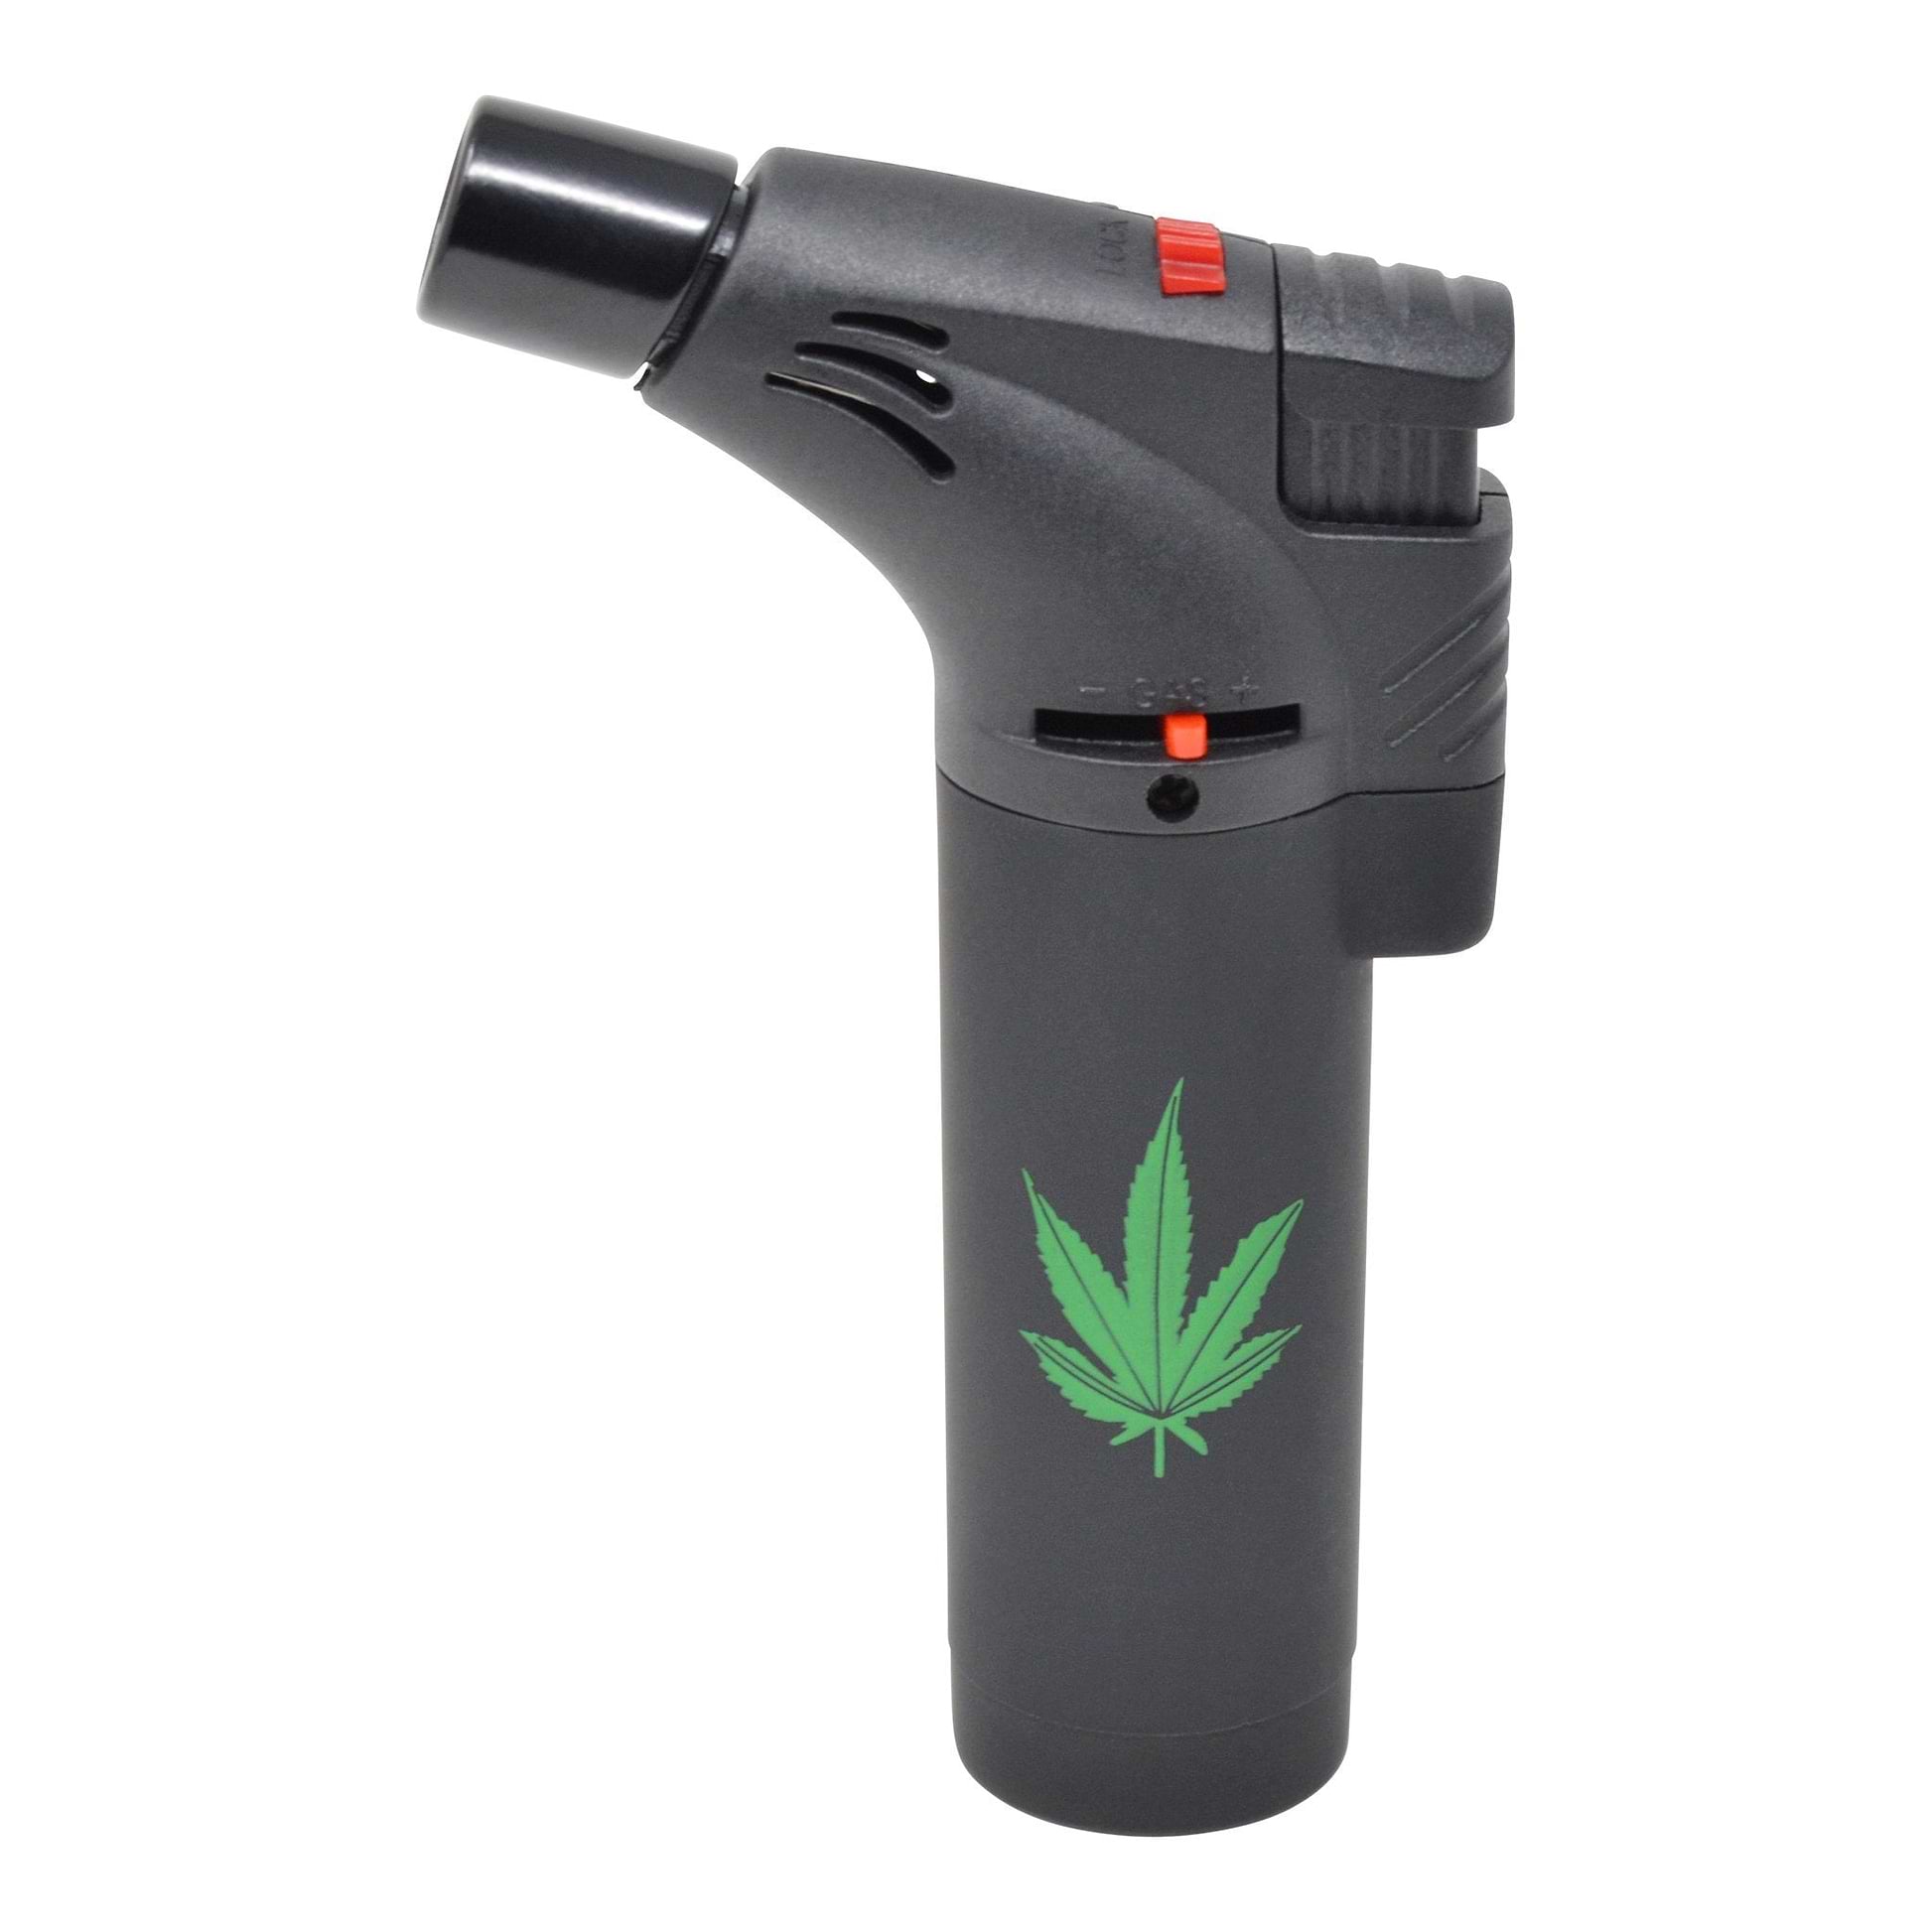 Full shot of black flame torch lighter with center green weed leaf design nozzle facing left